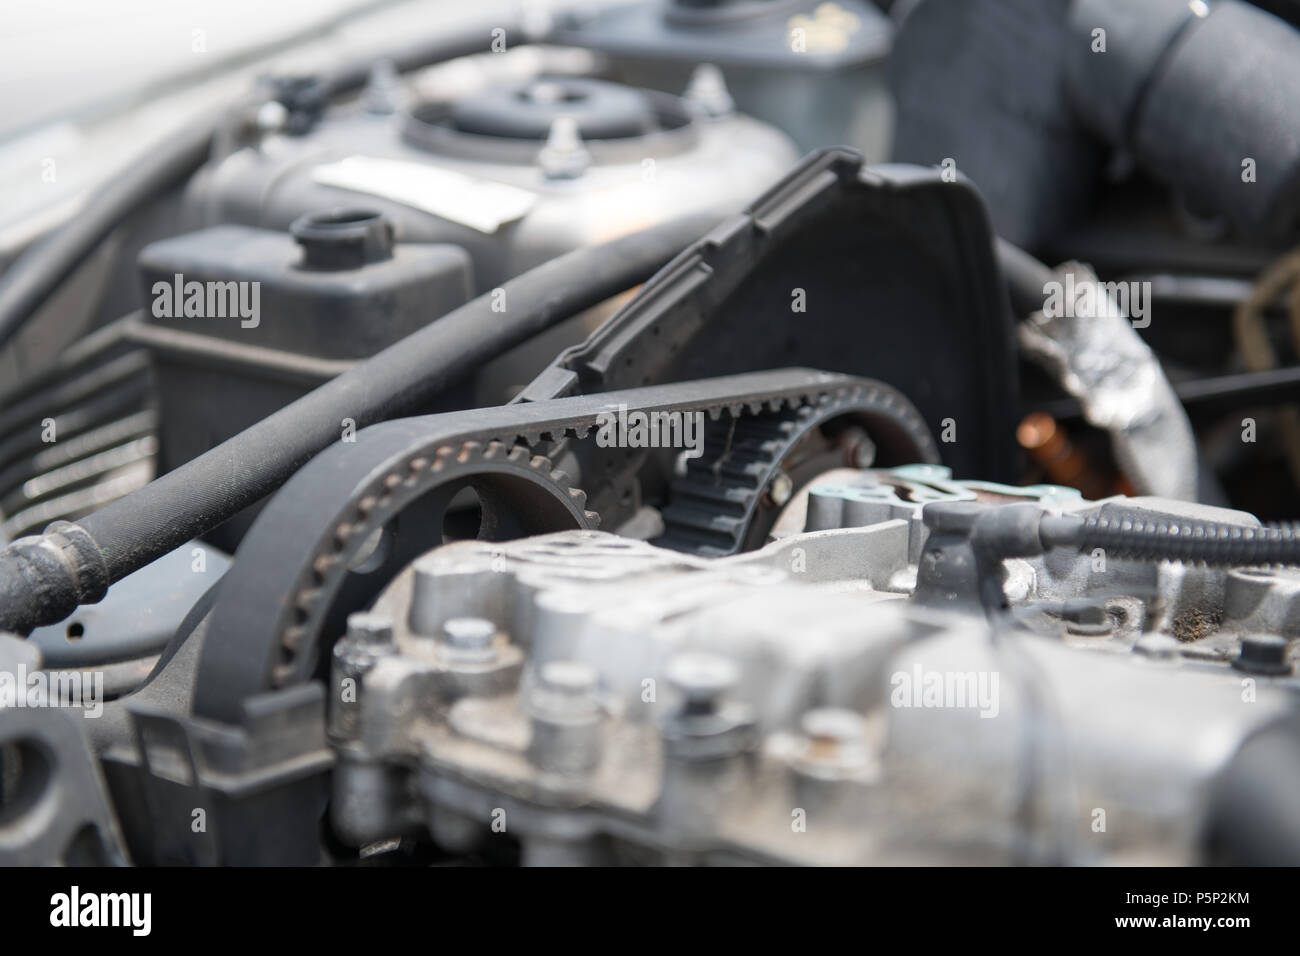 Timing Belt High Resolution Stock Photography and Images - Alamy